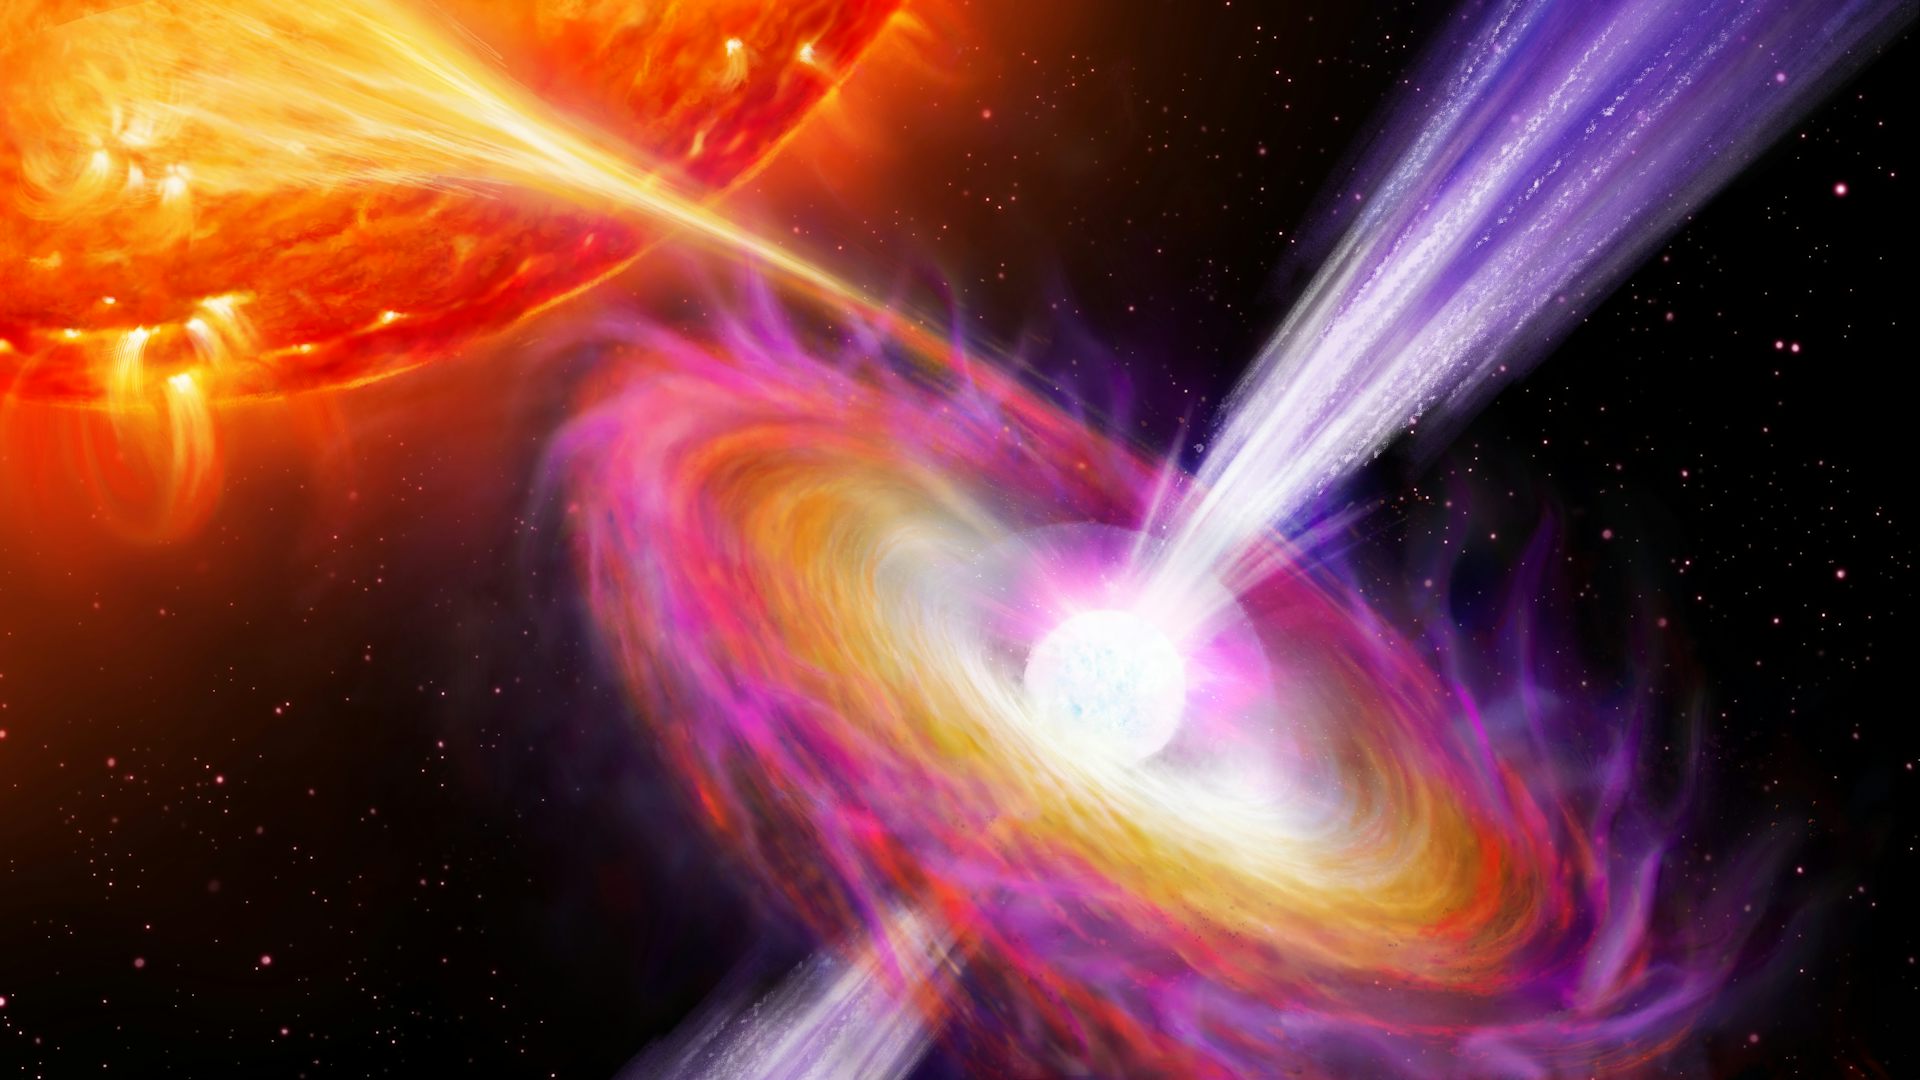 In a groundbreaking achievement, a cosmic 'speed camera' unveils the astonishing velocity of neutron star jets